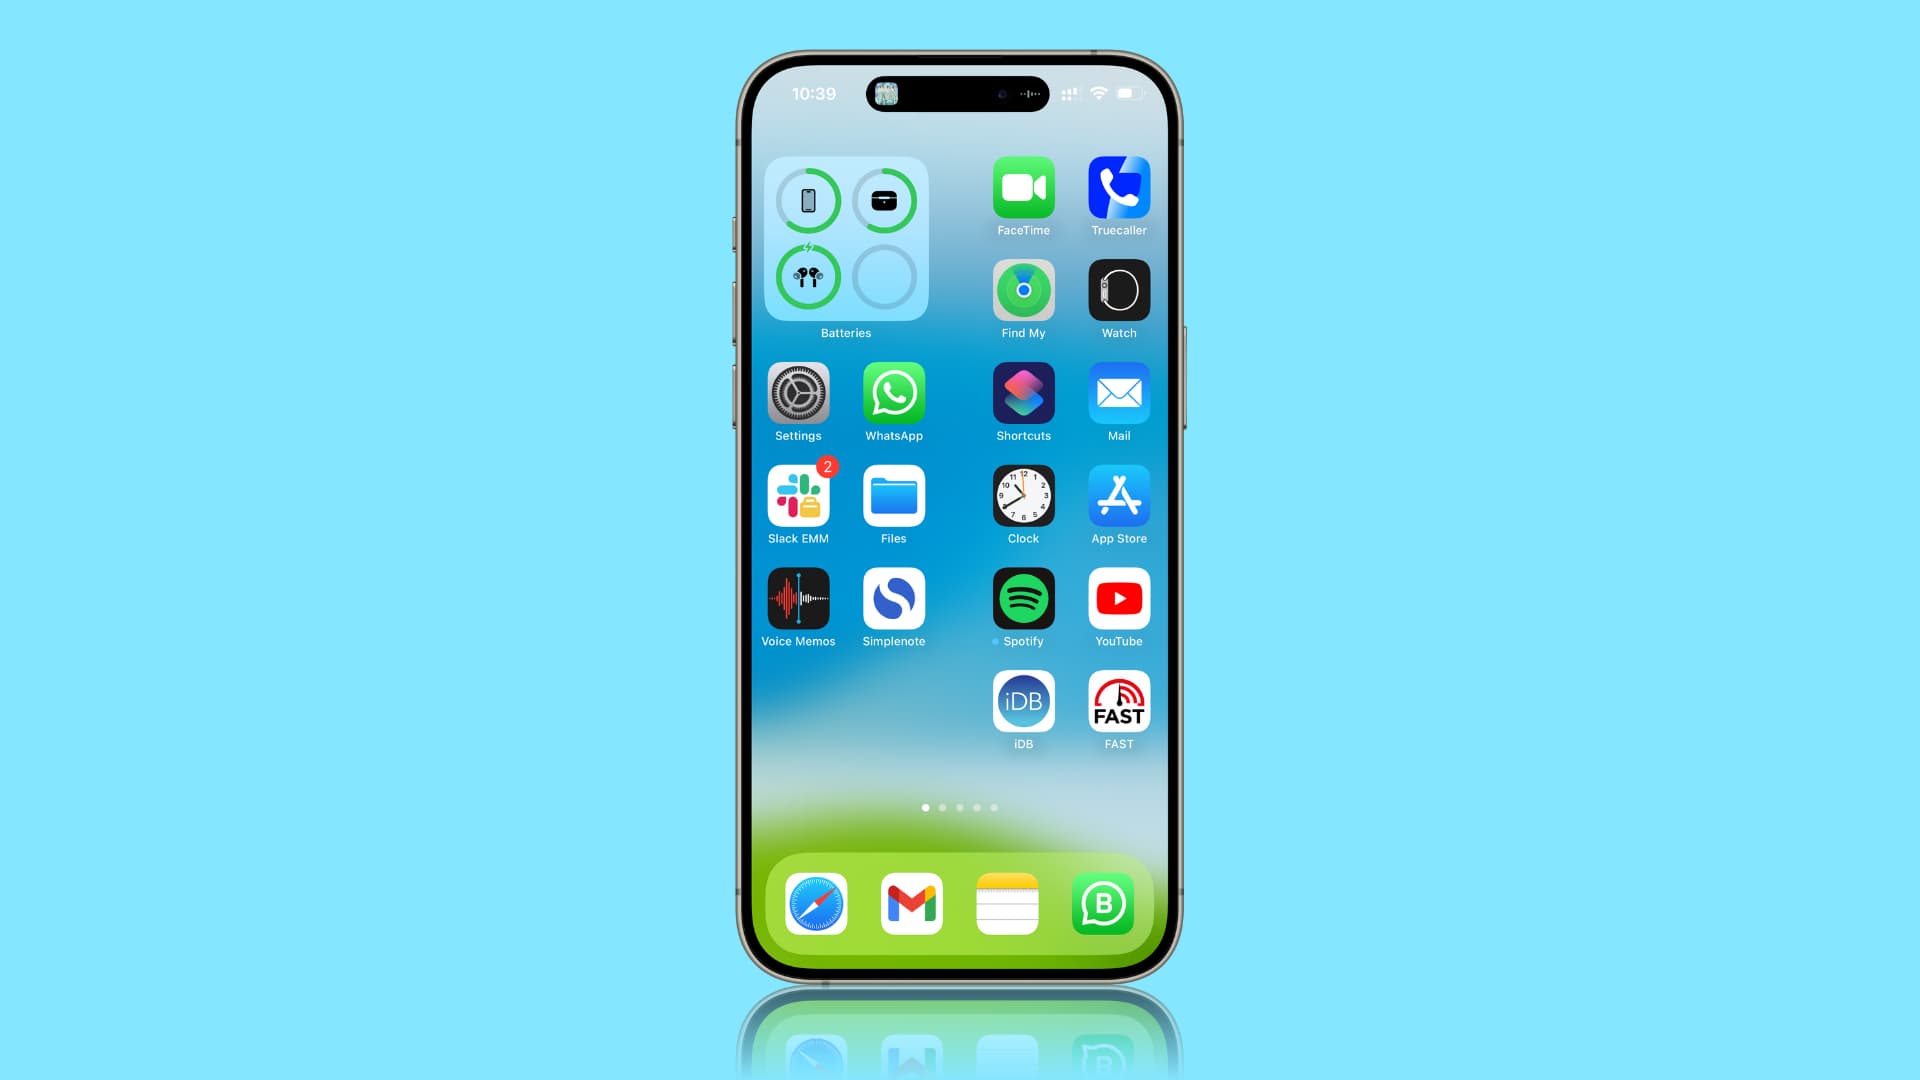 ProMotion displays should come to standard iPhone models in 2025